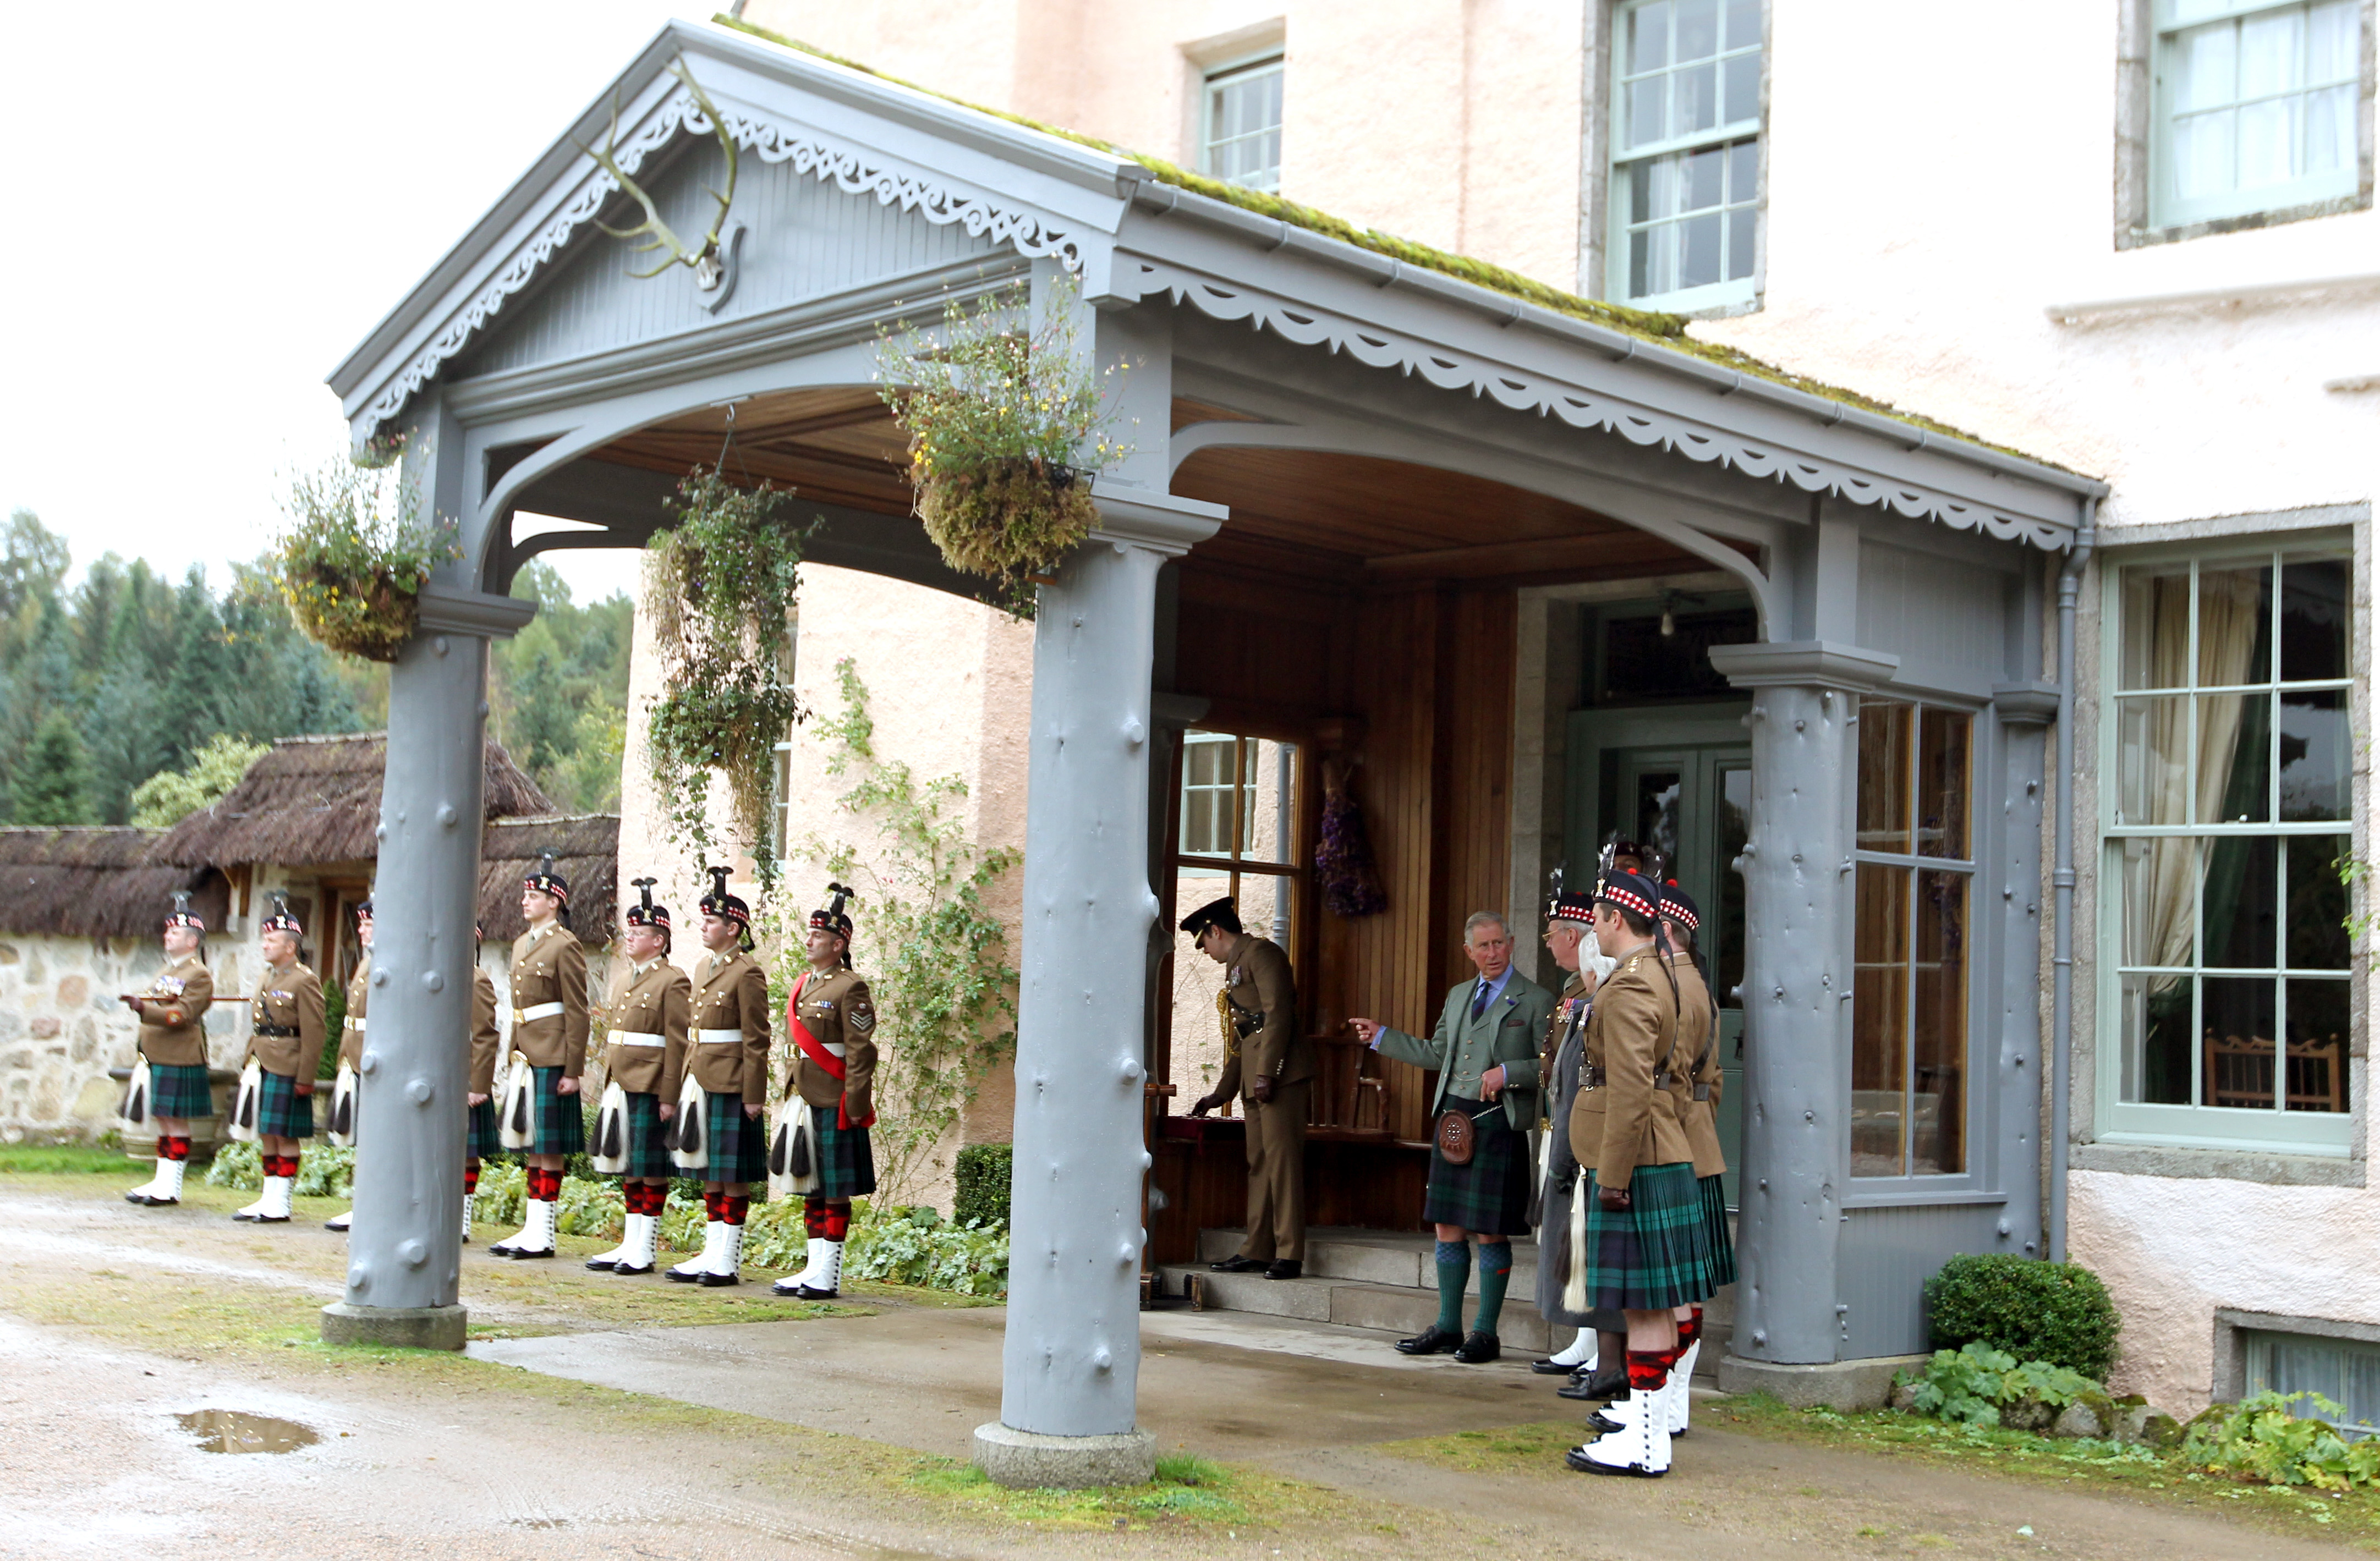 King Charles during a ceremony to present service medals to soldiers from the 51st Highland, 7th Battalion, The Royal Regiment of Scotland in the grounds of Birkhall in Ballater, Aberdeenshire, on October 13, 2012. | Source: Getty Images